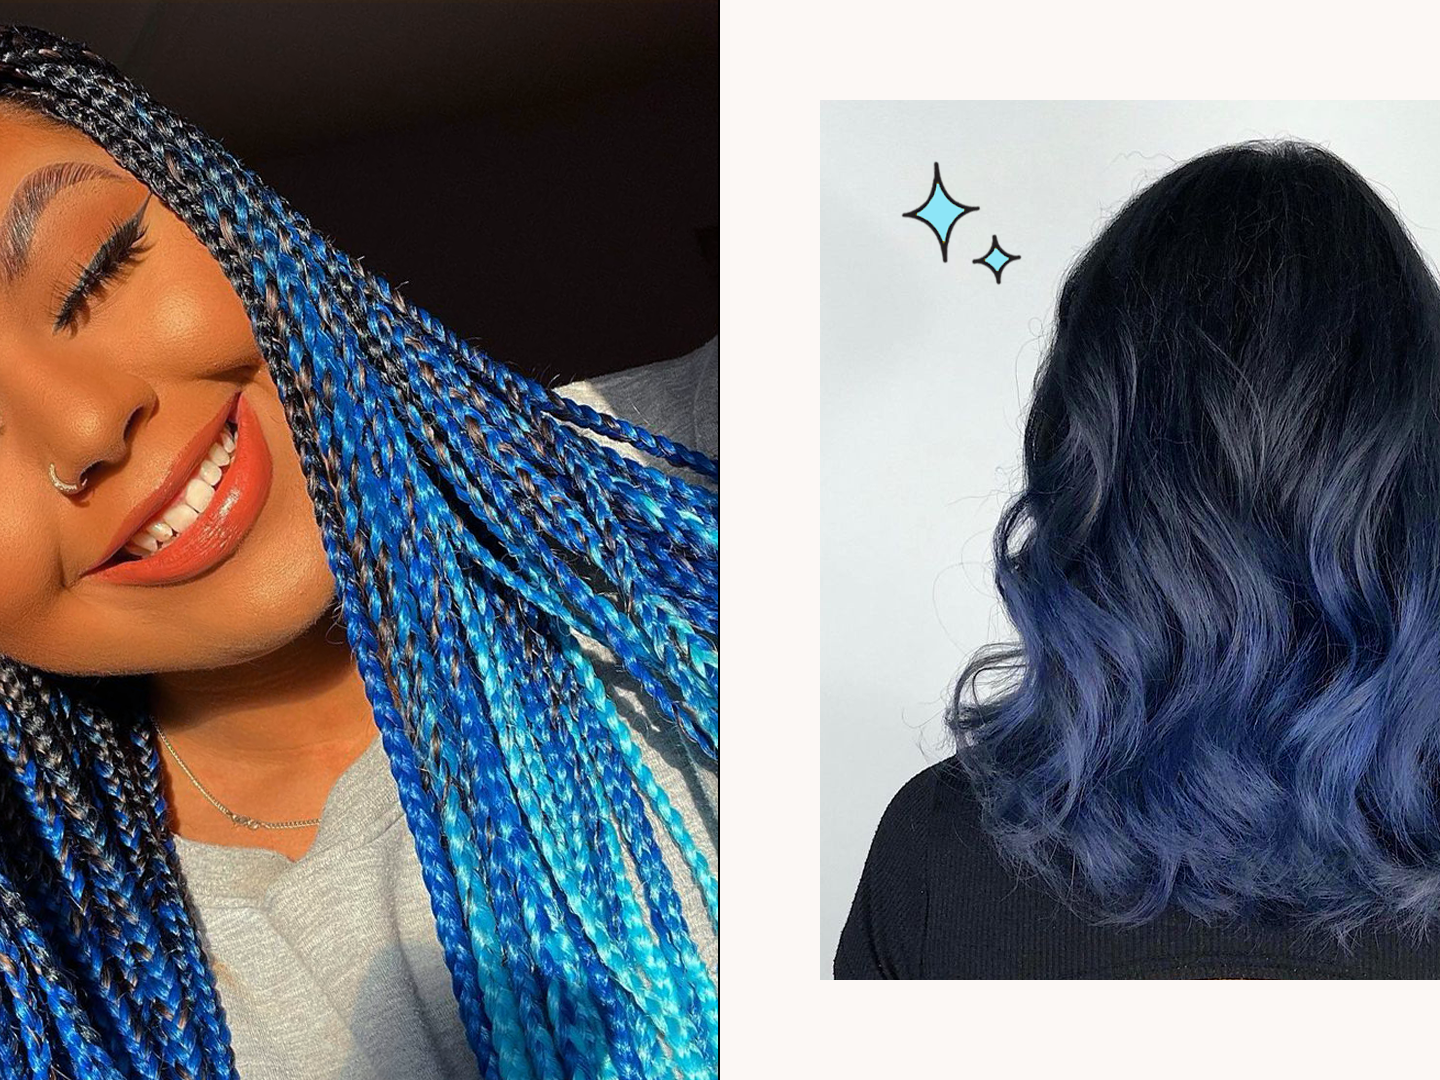 black to purple to blue ombre hair